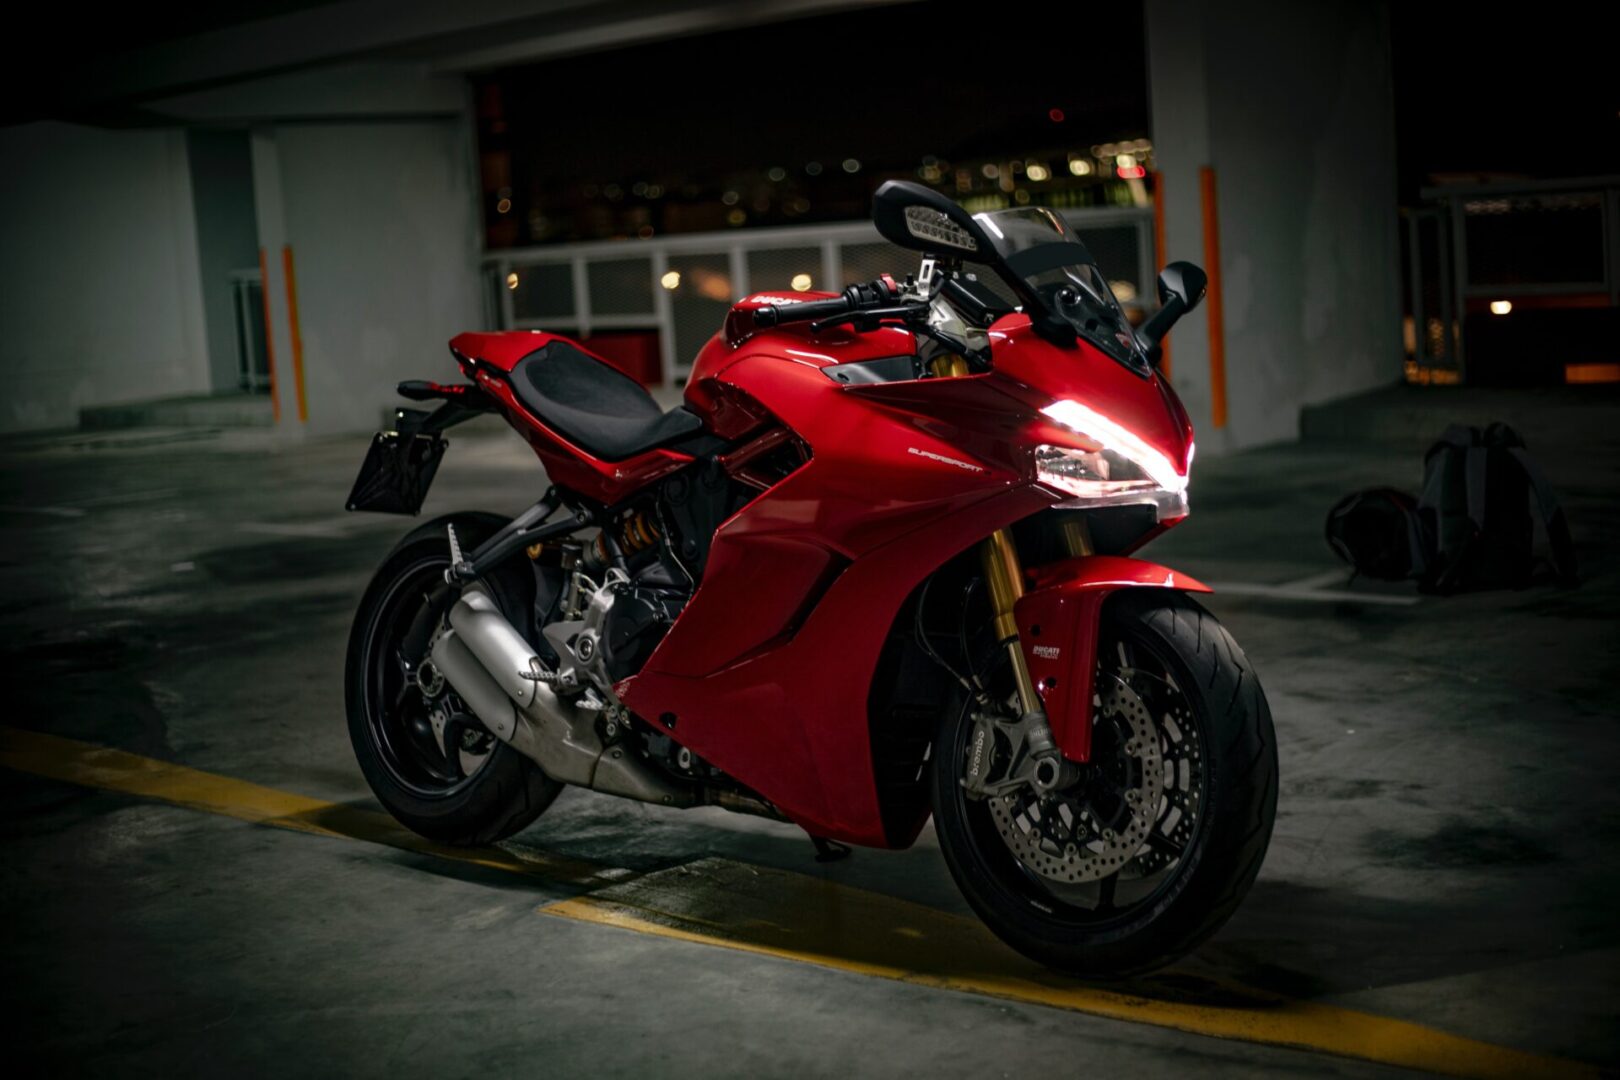 A red motorcycle parked in a parking garage.